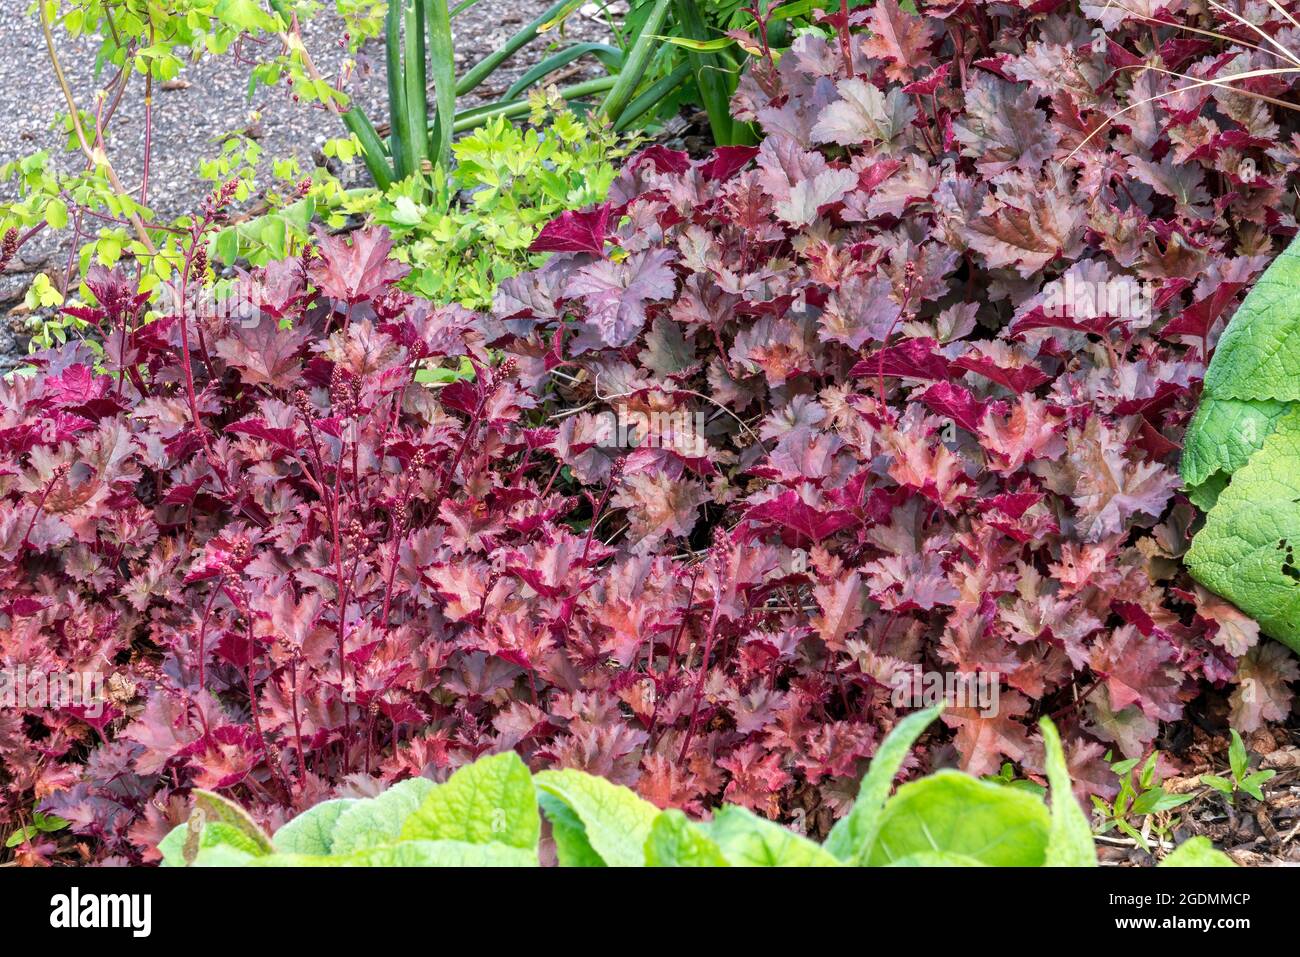 Heuchera 'Chocolate Ruffles' a herbaceous perennial a spring summer foliage plant with purple leaves commonly known as alum root, stock photo image Stock Photo